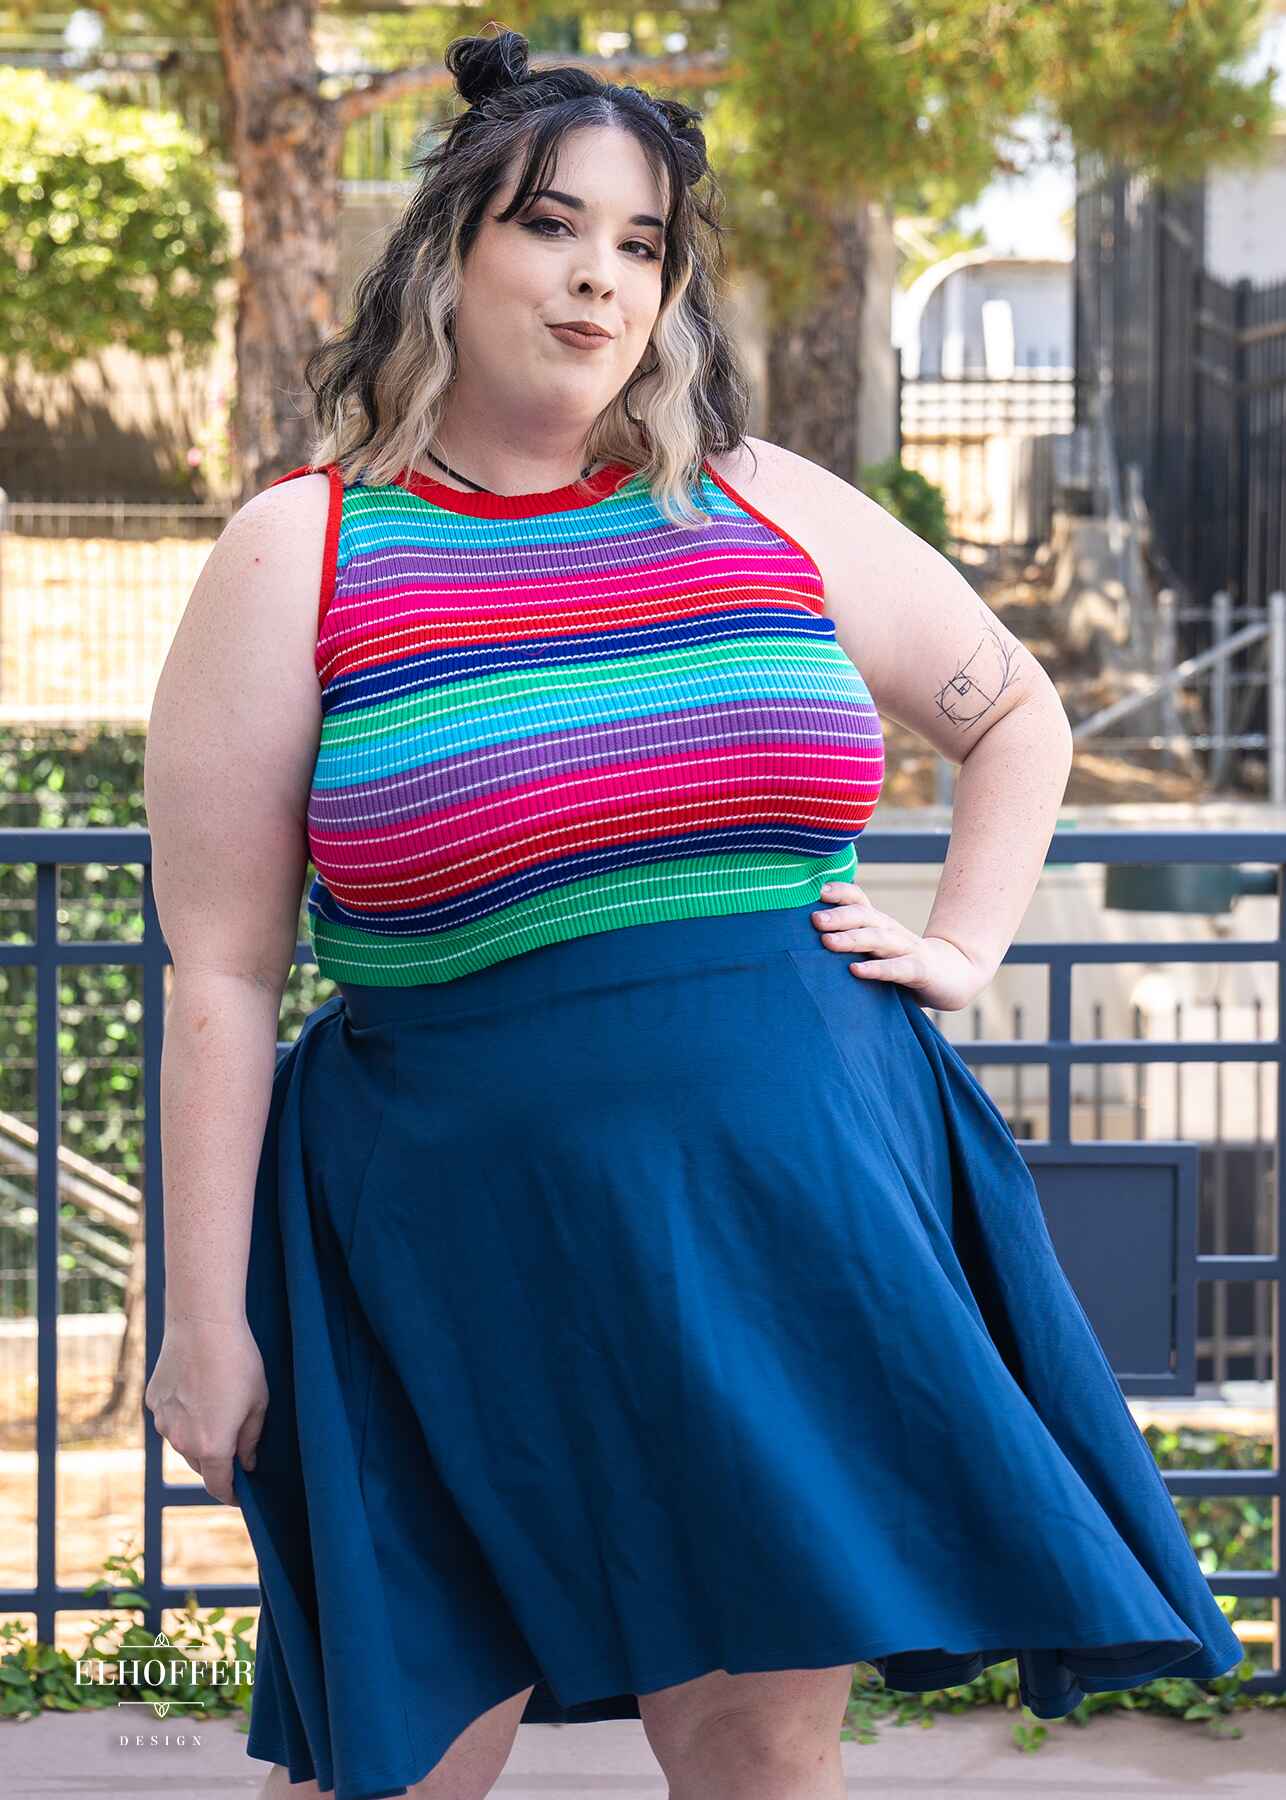 Katie Lynn, a fair skinned 2xl model with shoulder length black and blonde hair is wearing a sleeveless striped knit crop top. The crop top has thicker stripes of green, blue, red, pink, purple, and teal with pinstripe white lines in each colored stripe. She paired the crop top with a knee length denim blue high low skirt. Shirt is also available in a longer version.